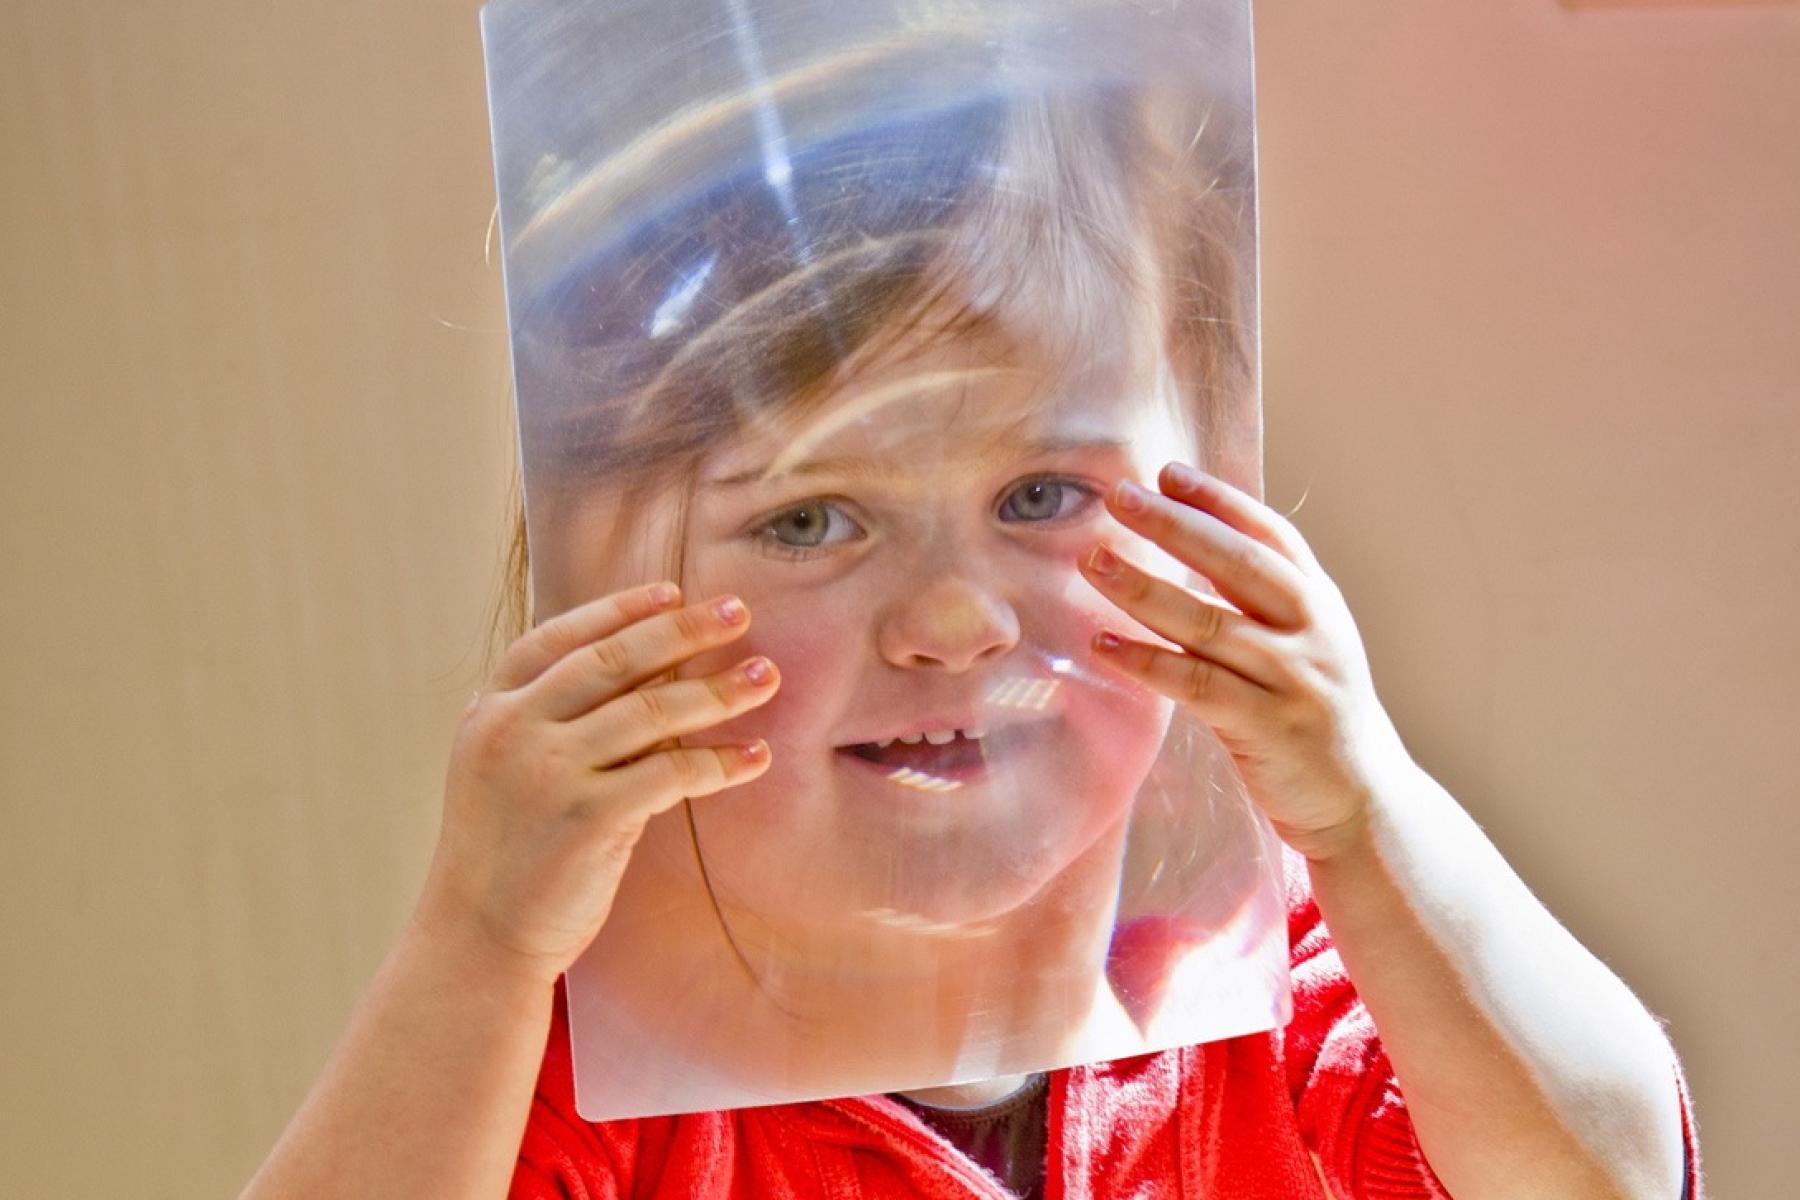 A young person does a thin film activity related to the story "Horton Senses Something Small"